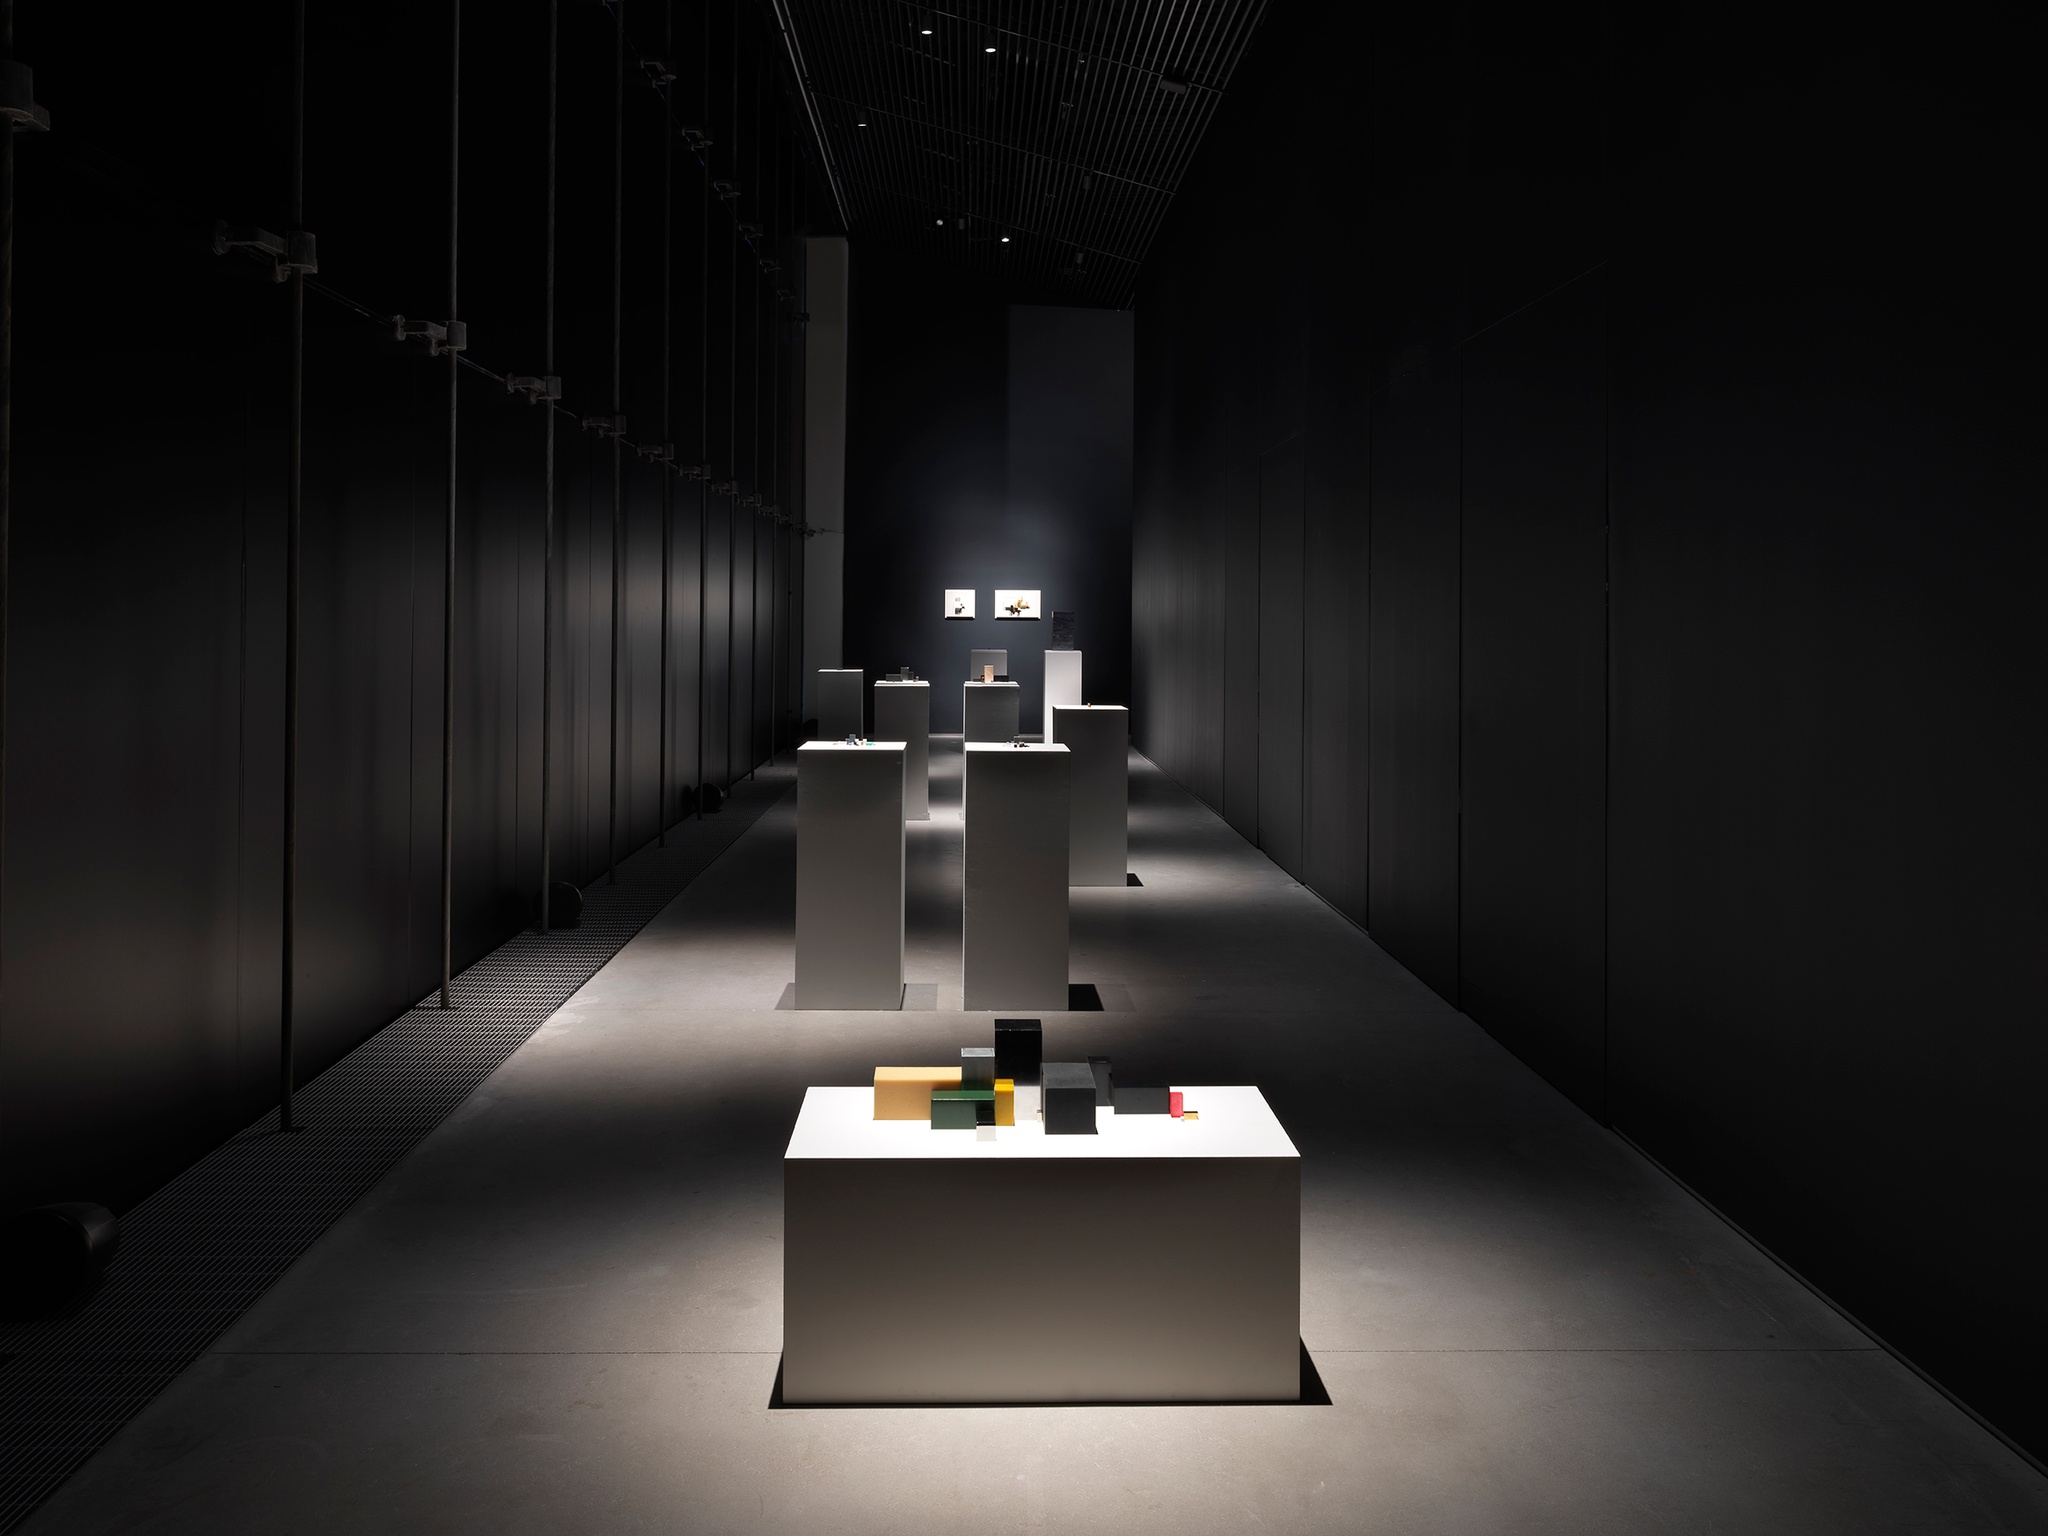 A gallery hallway with a line of plinths topped by sculptures assembled from small rectangular blocks